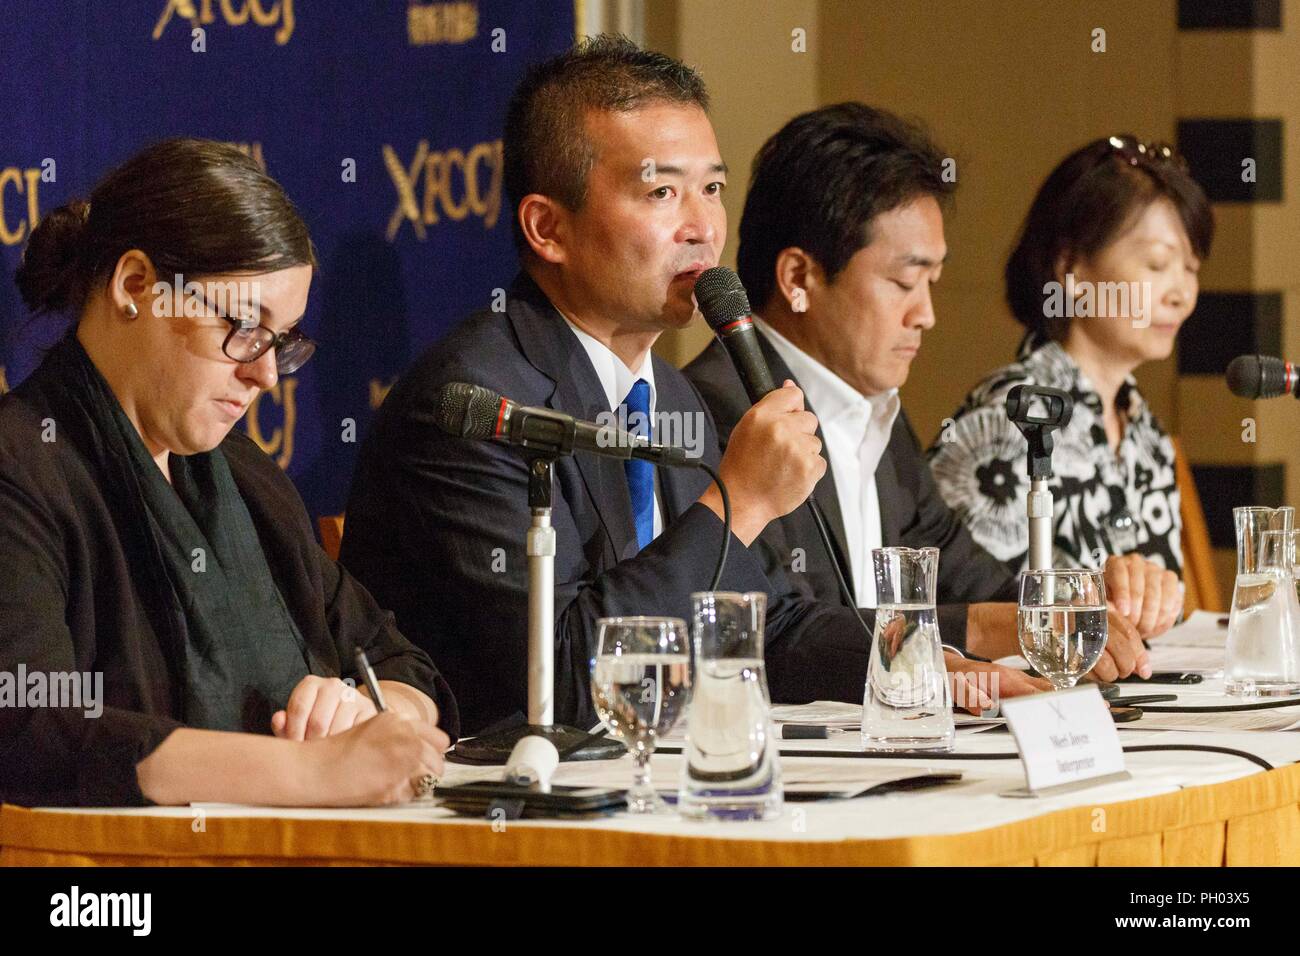 Tokyo, Japan. 29th Aug 2018. Japanese politicians Keisuke Tsumura (C-L) and Yuichiro Tamaki (C-R), both candidates for their party's leadership, speak during a news conference at the Foreign Correspondents' Club of Japan on August 29, 2018, Tokyo, Japan. Tamaki and Tsumura answered questions about the coming leadership election for the Democratic Party For the People, which is set for September 4. Credit: Rodrigo Reyes Marin/AFLO/Alamy Live News Stock Photo